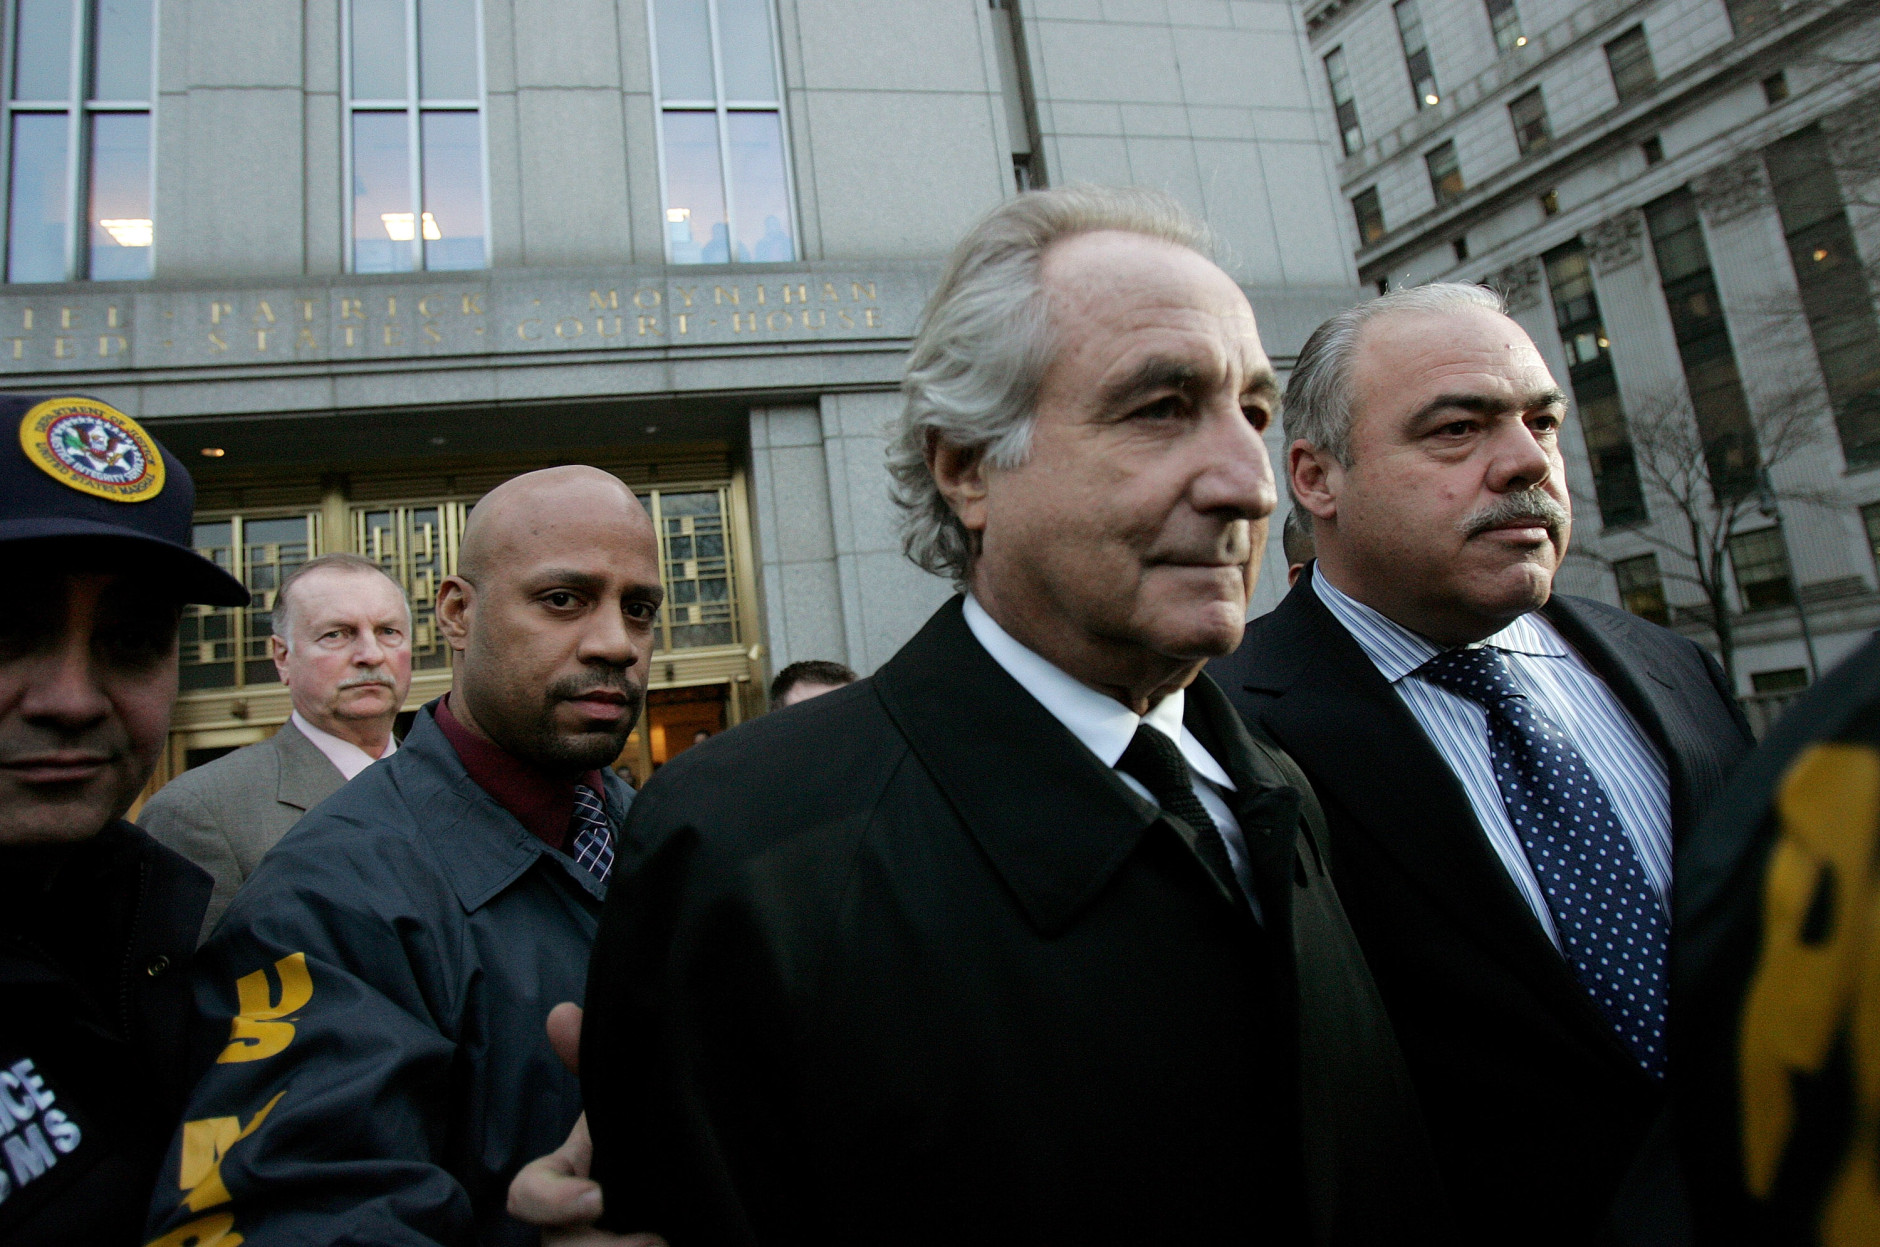 NEW YORK - JANUARY 5:  Bernard Madoff (L) walks out from Federal Court after a bail hearing in Manhattan January 5, 2009 in New York City. Madoff is accused of running a $50 billion Ponzi scheme through his investment company. Madoff is free on bail and hasn�t formally responded to the charges or entered a plea.  (Photo by Hiroko Masuike/Getty Images)